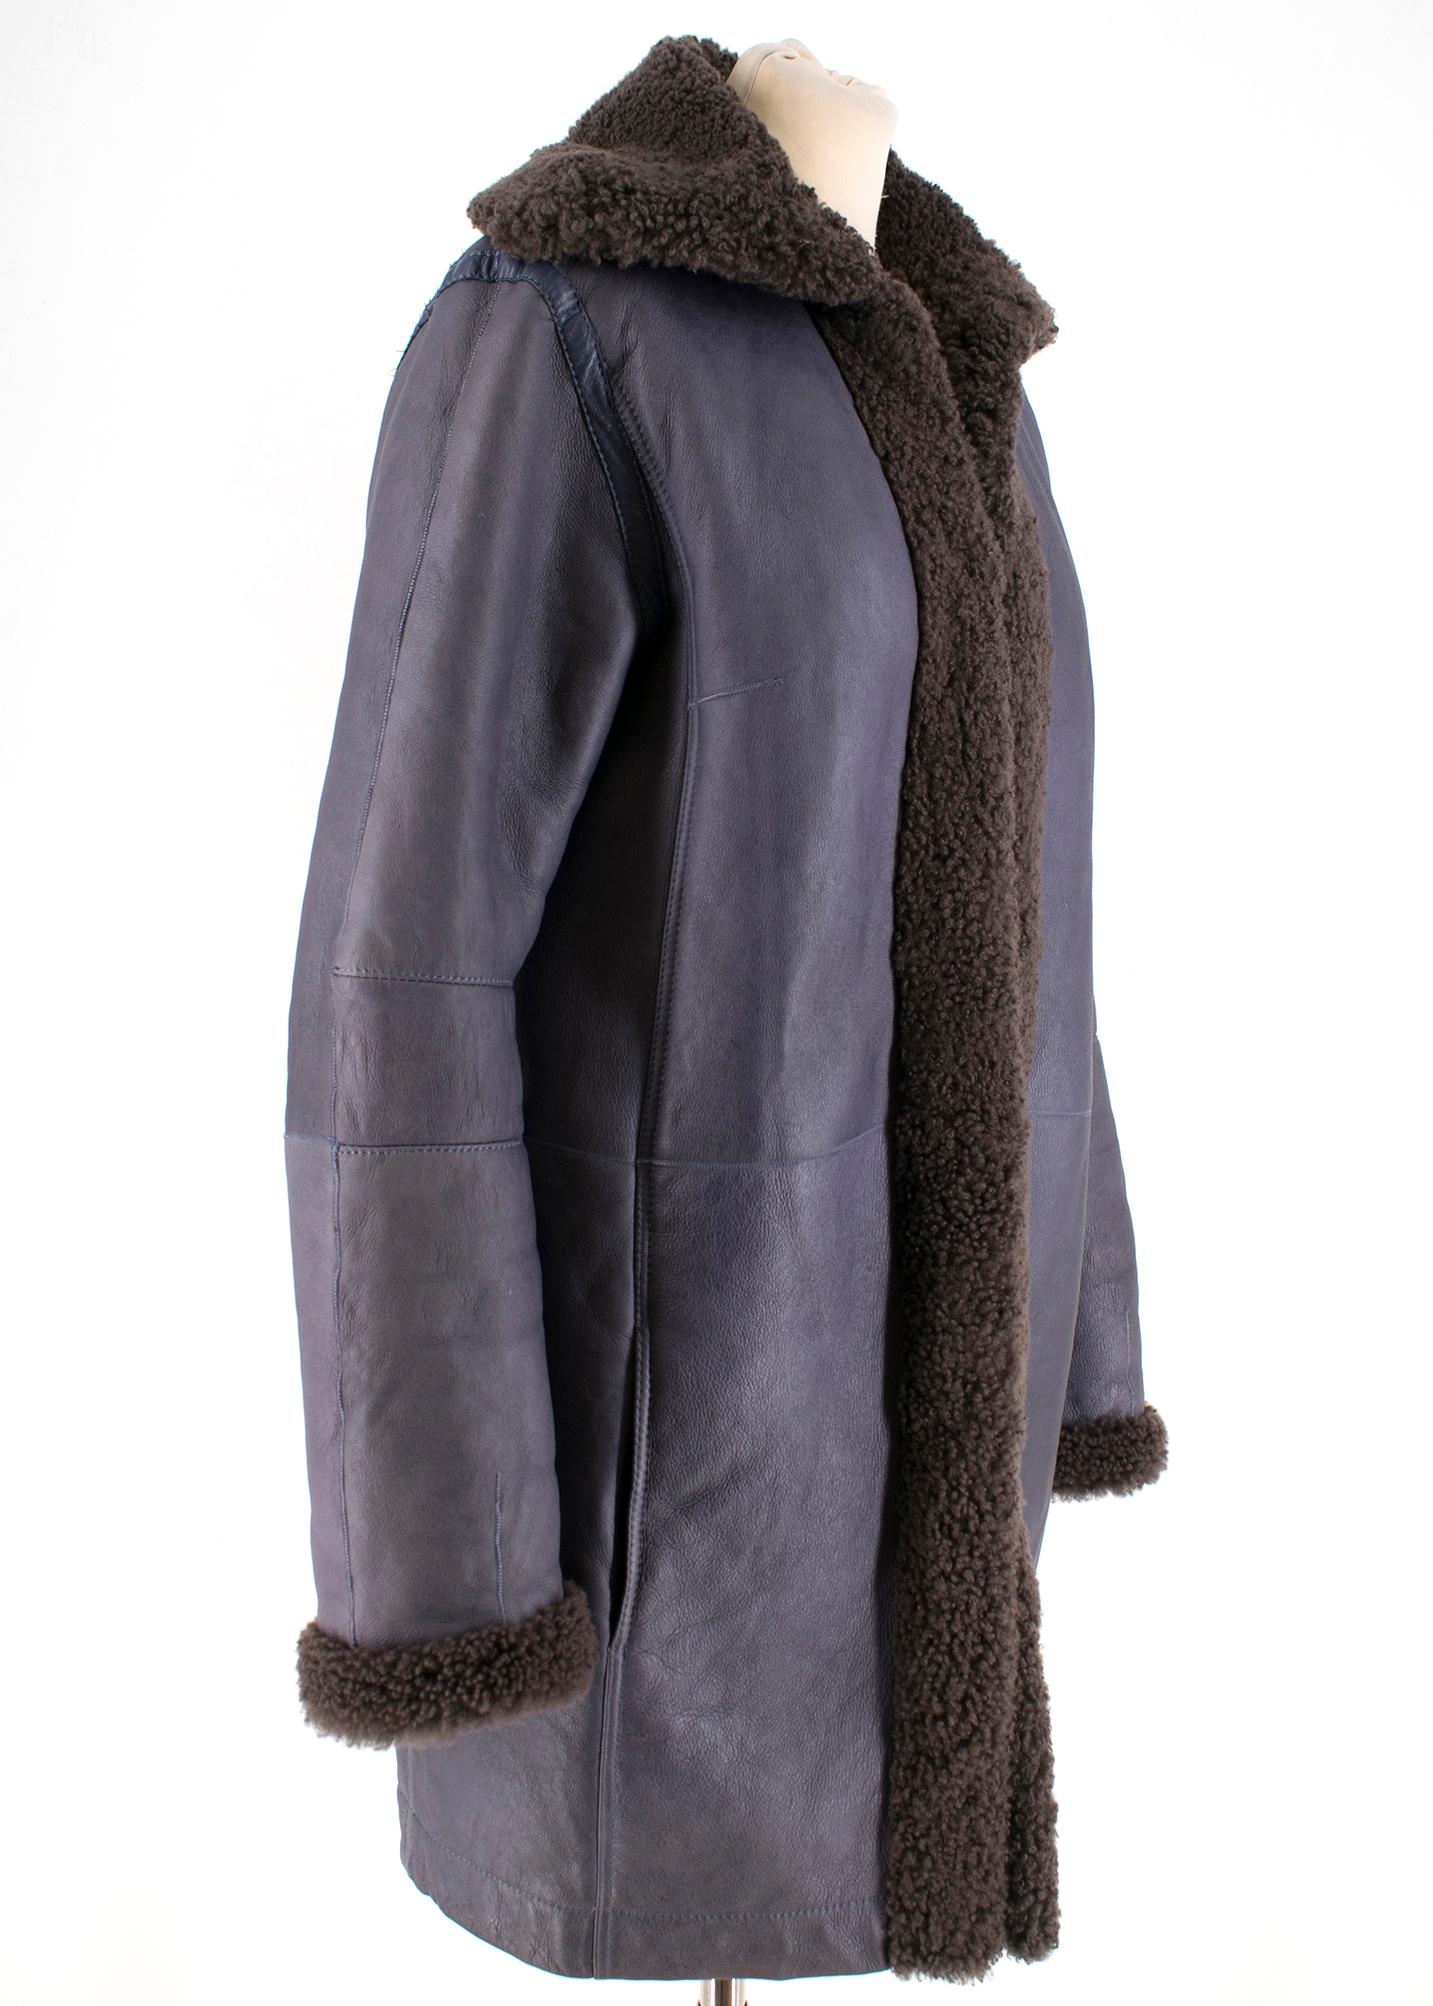 Balenciaga blue mid-length coat with a brown shearling interior and long sleeves. RRP £1650

- Concealed front buttons
- Side pockets
- 100% lamb
- Made in Turkey

Measurements are taken laying flat, seam to seam. 


Shoulders:40cm
Sleeves: